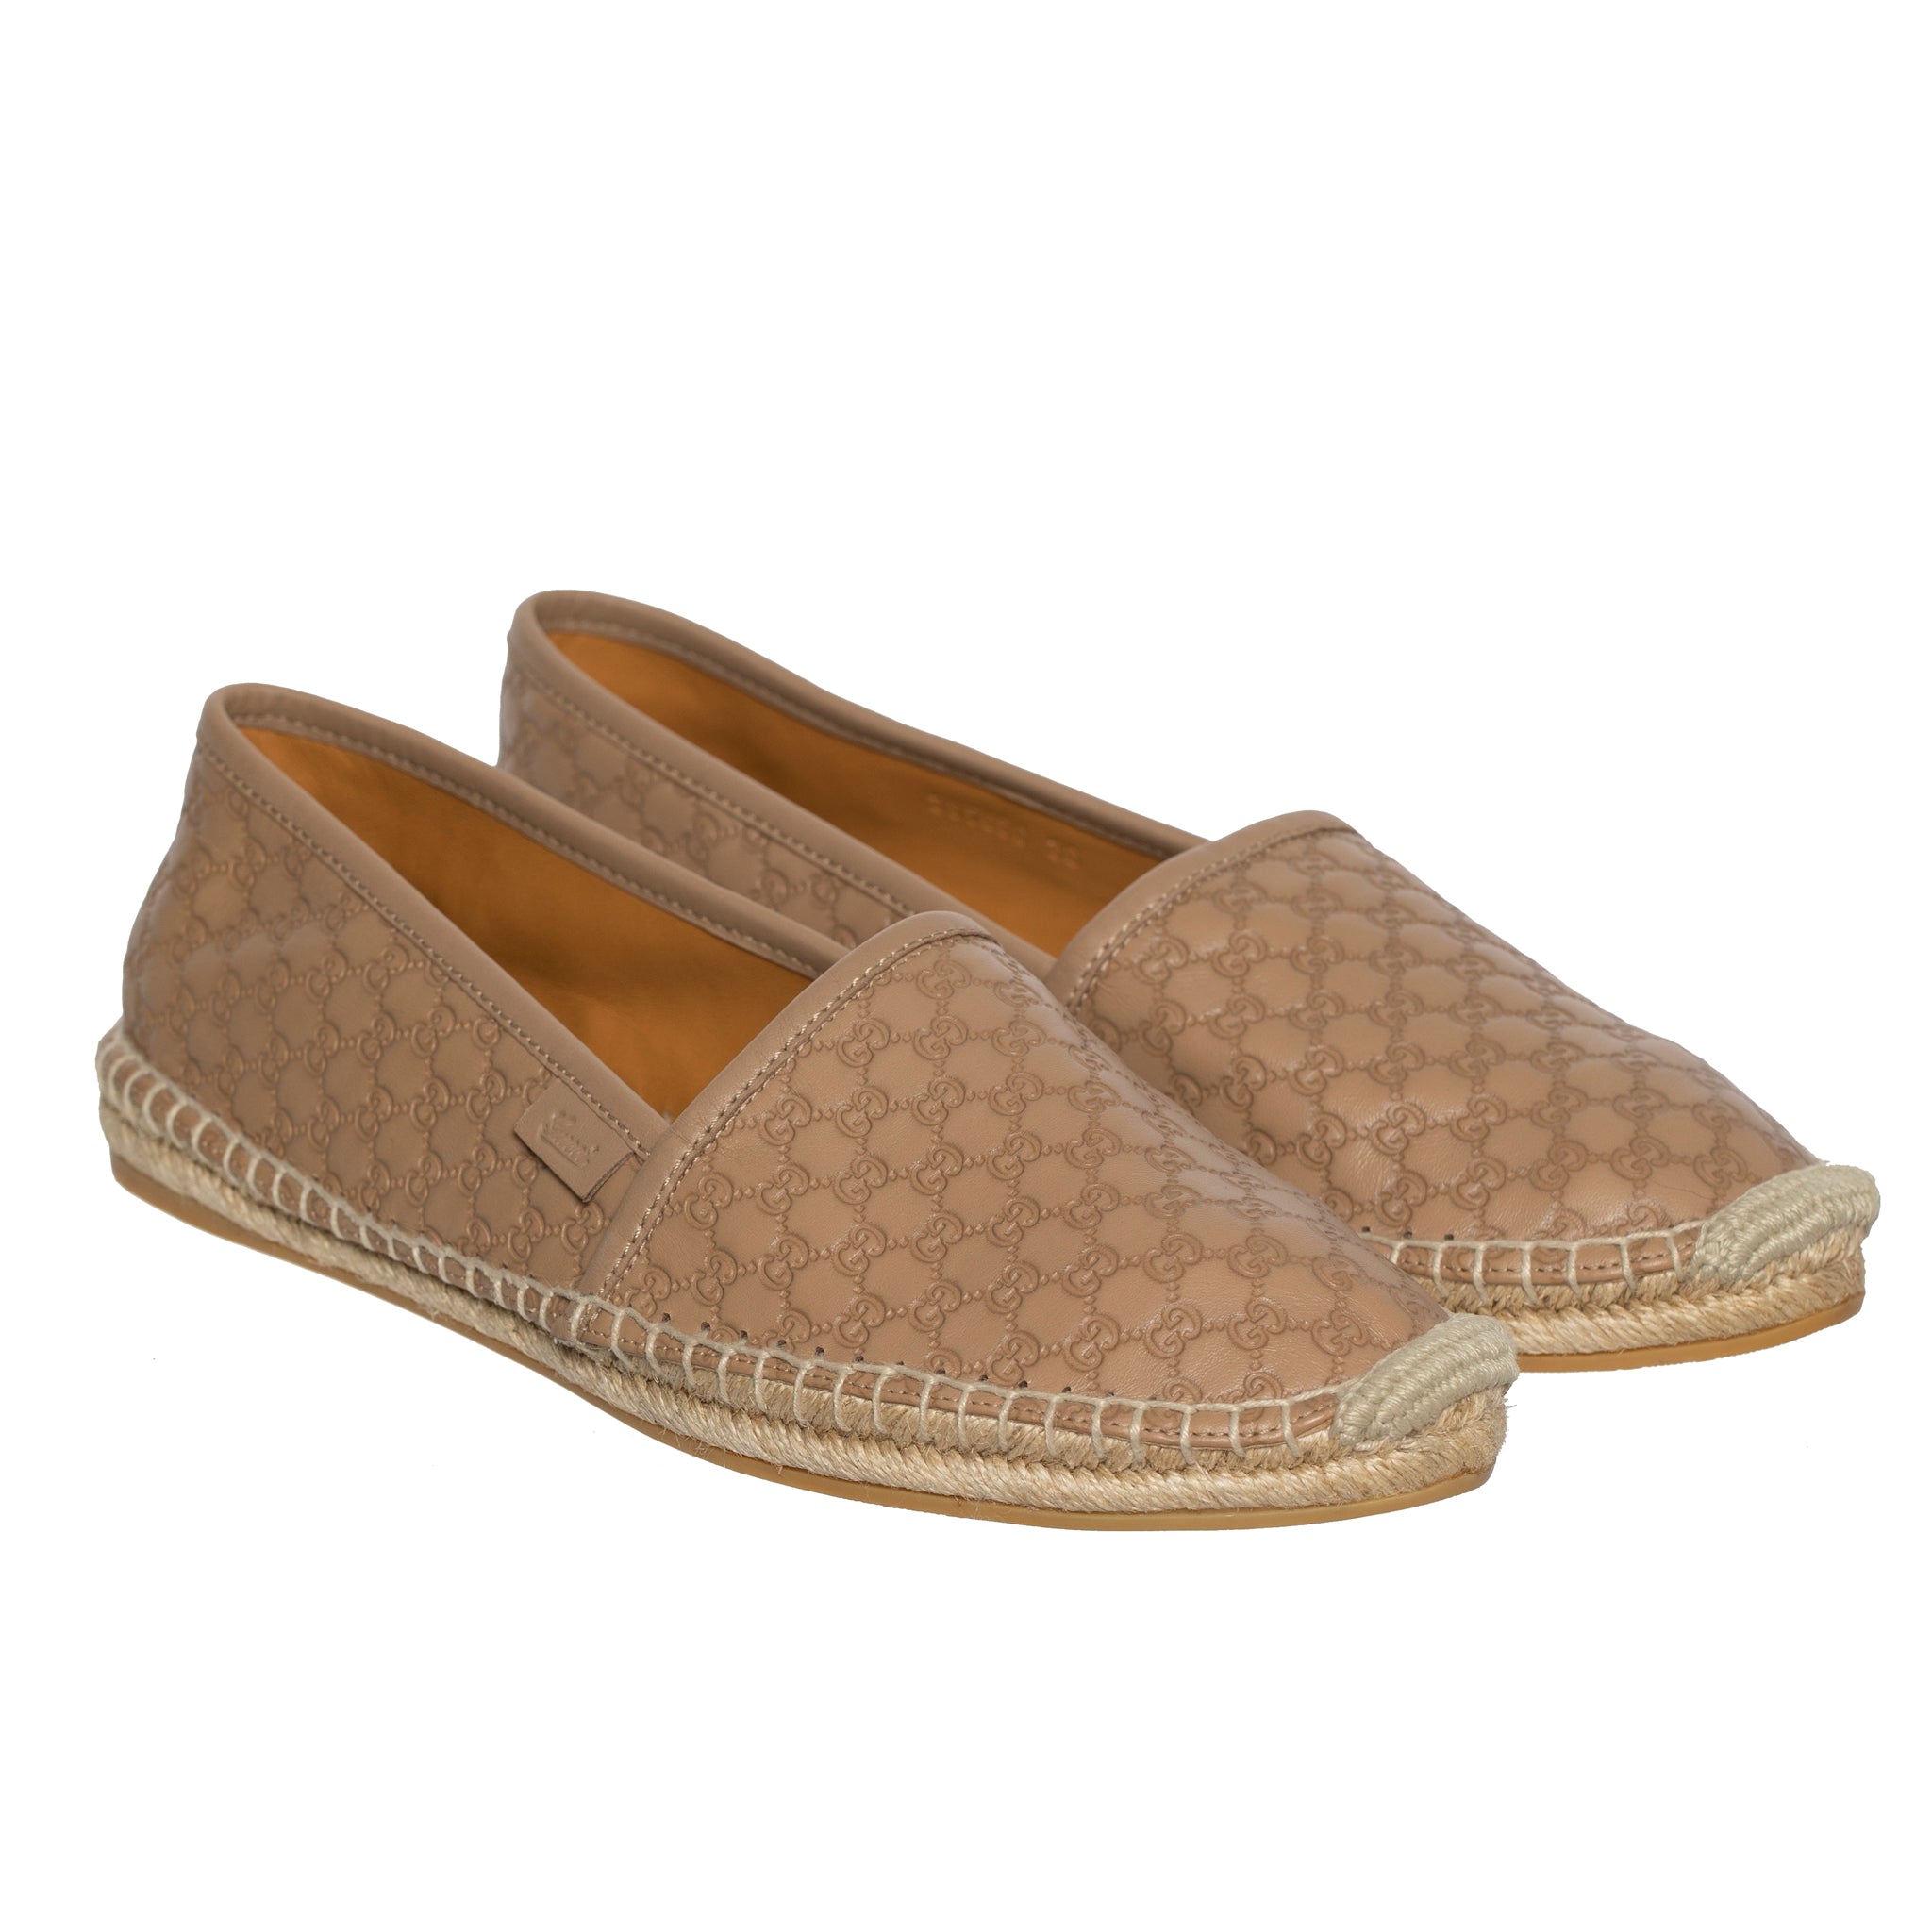 GUCCI MONOGRAM LEATHER ESPADRILLE TAN 38 IT - On Repeat